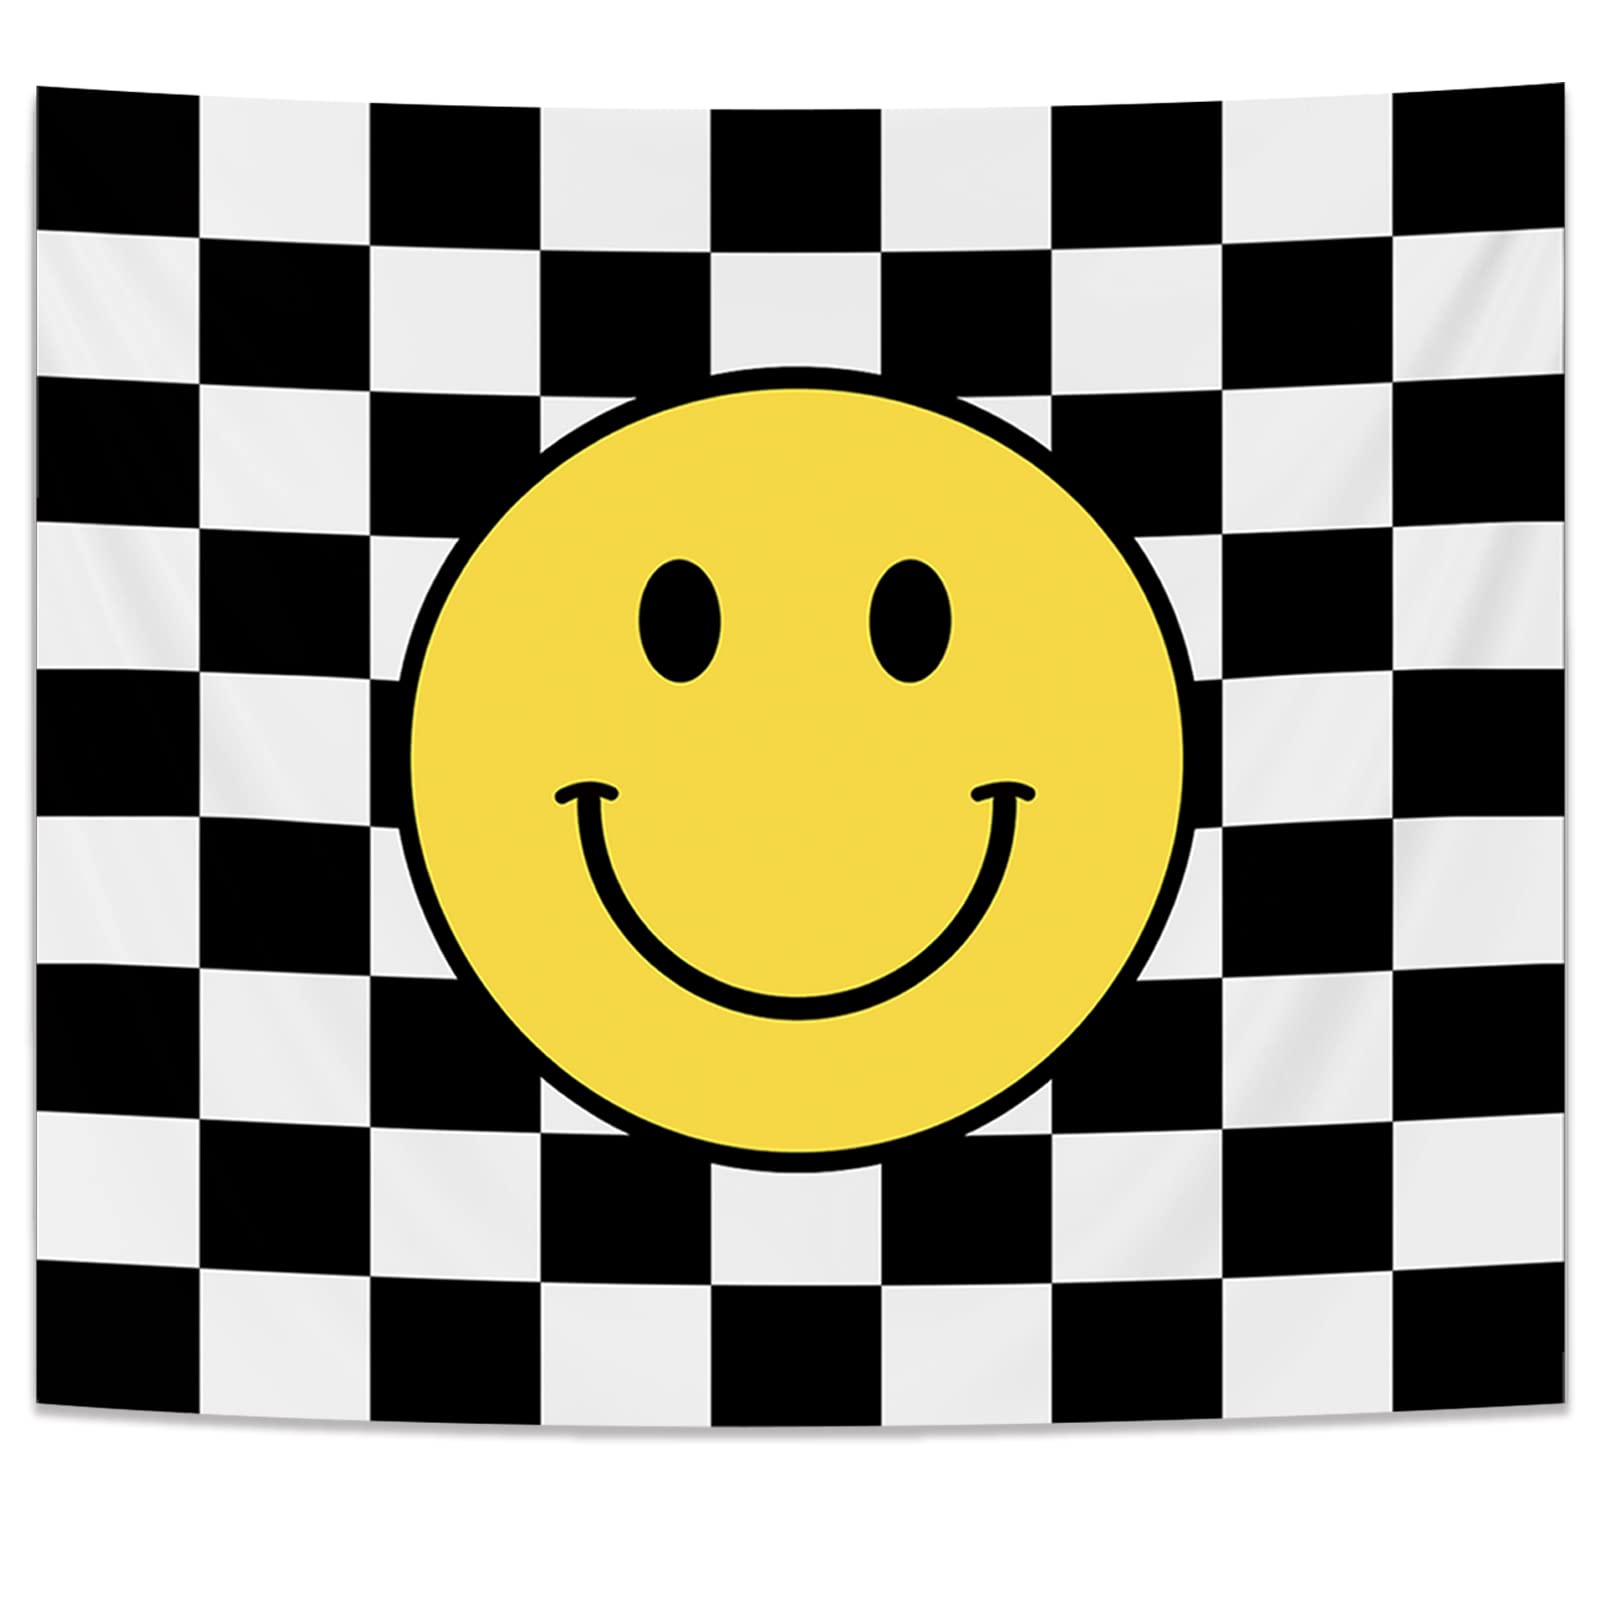 Pecfamly Black and White Smiley Face Tapestry for Bedroom, Preppy Room Decor Aesthetic for Teen Girls, Smiley Face Dorm Room Decor, Cute Room Decor for Bedroom Aesthetic Black and White